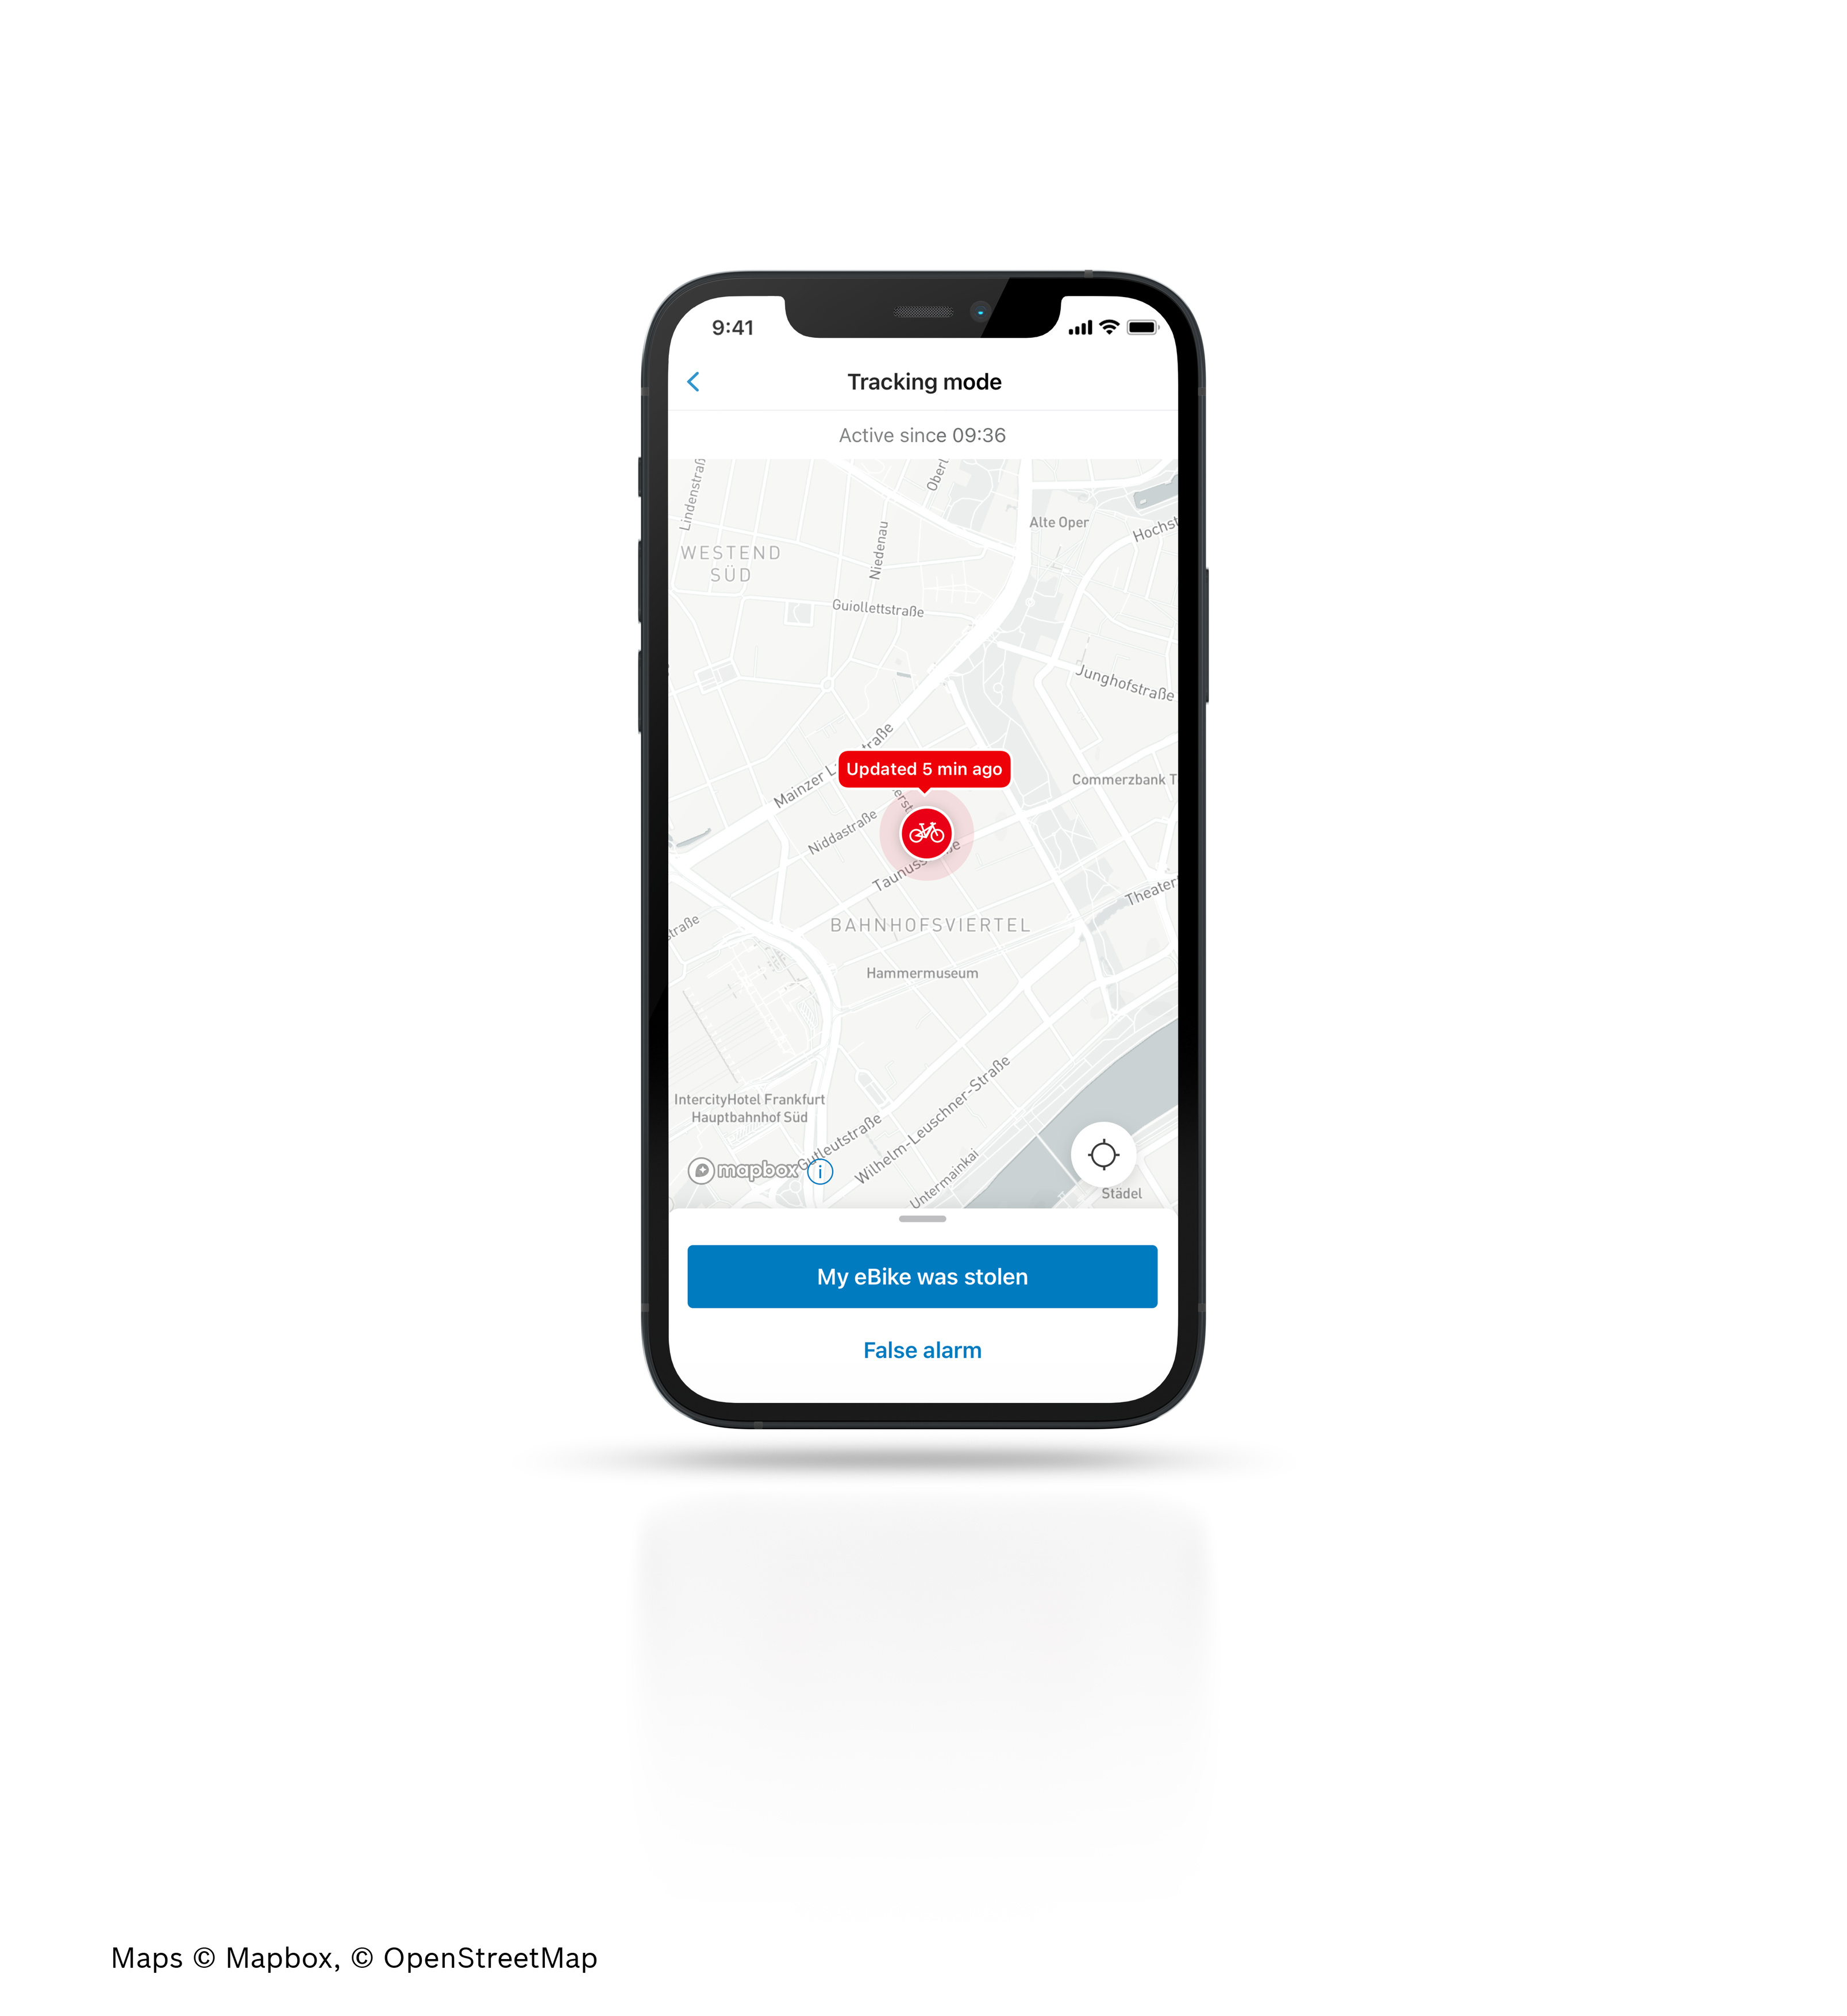 When a GPS connection is established, users can see the location and security status of their eBike in the eBike Flow app at any time.